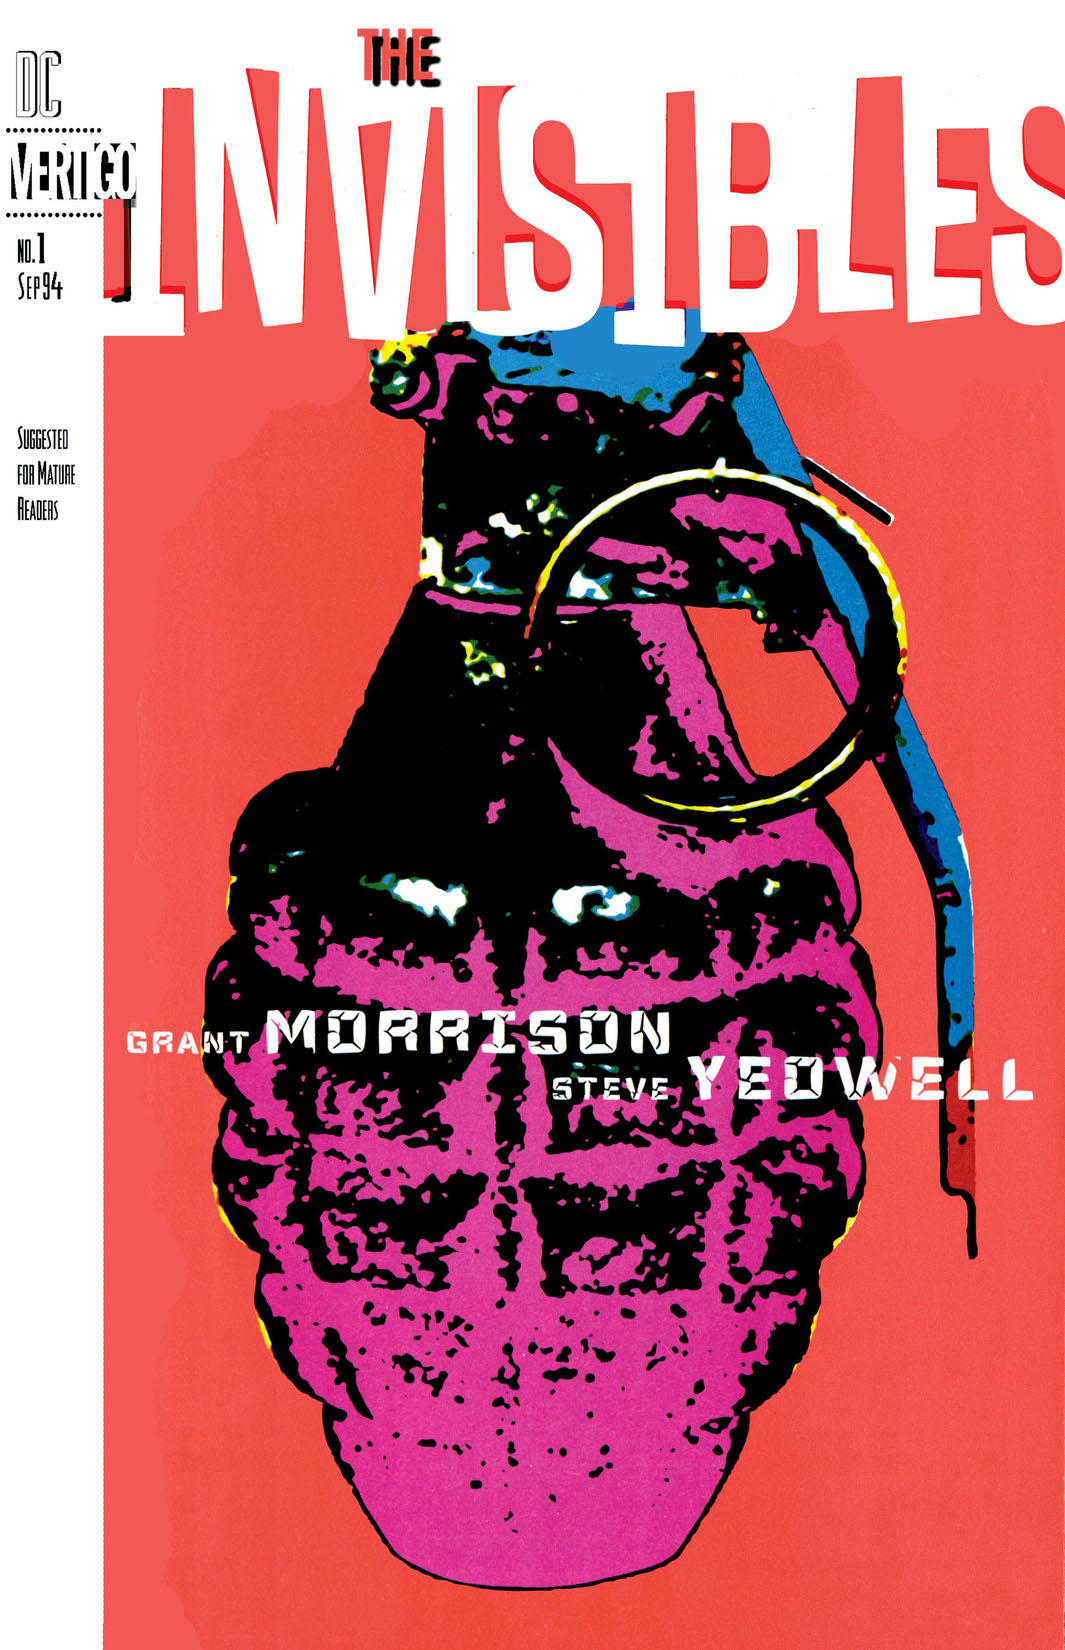 The Invisibles #1 preview images